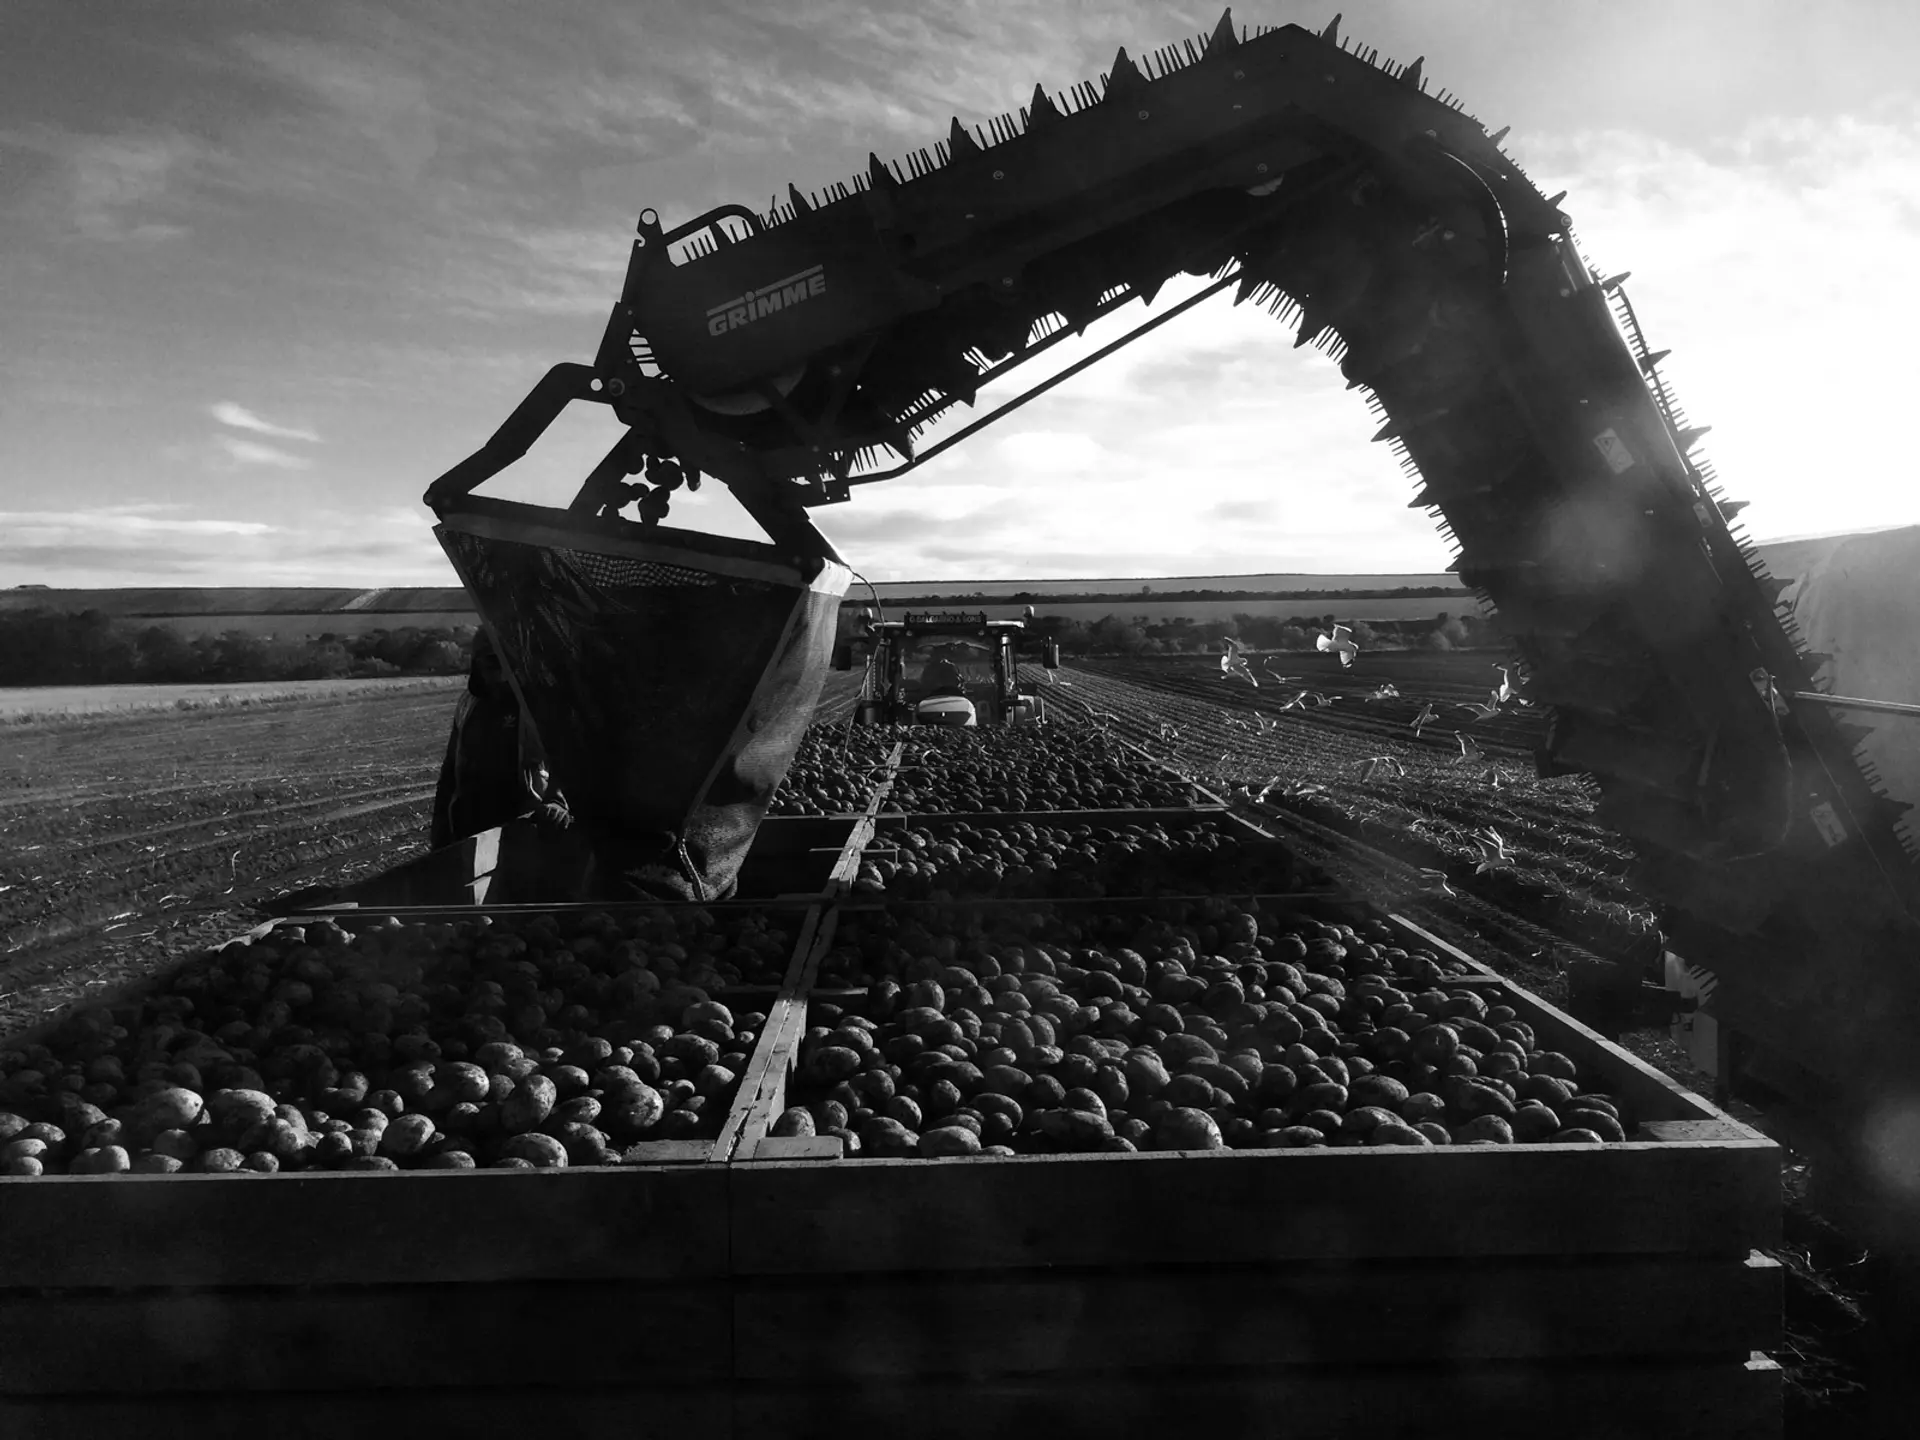 A large arm of a farm machine puts potatoes in square wooden boxes. The image is black and white. A tractor is hidden at the end of the boxes. Seagulls fly around the bare earth.